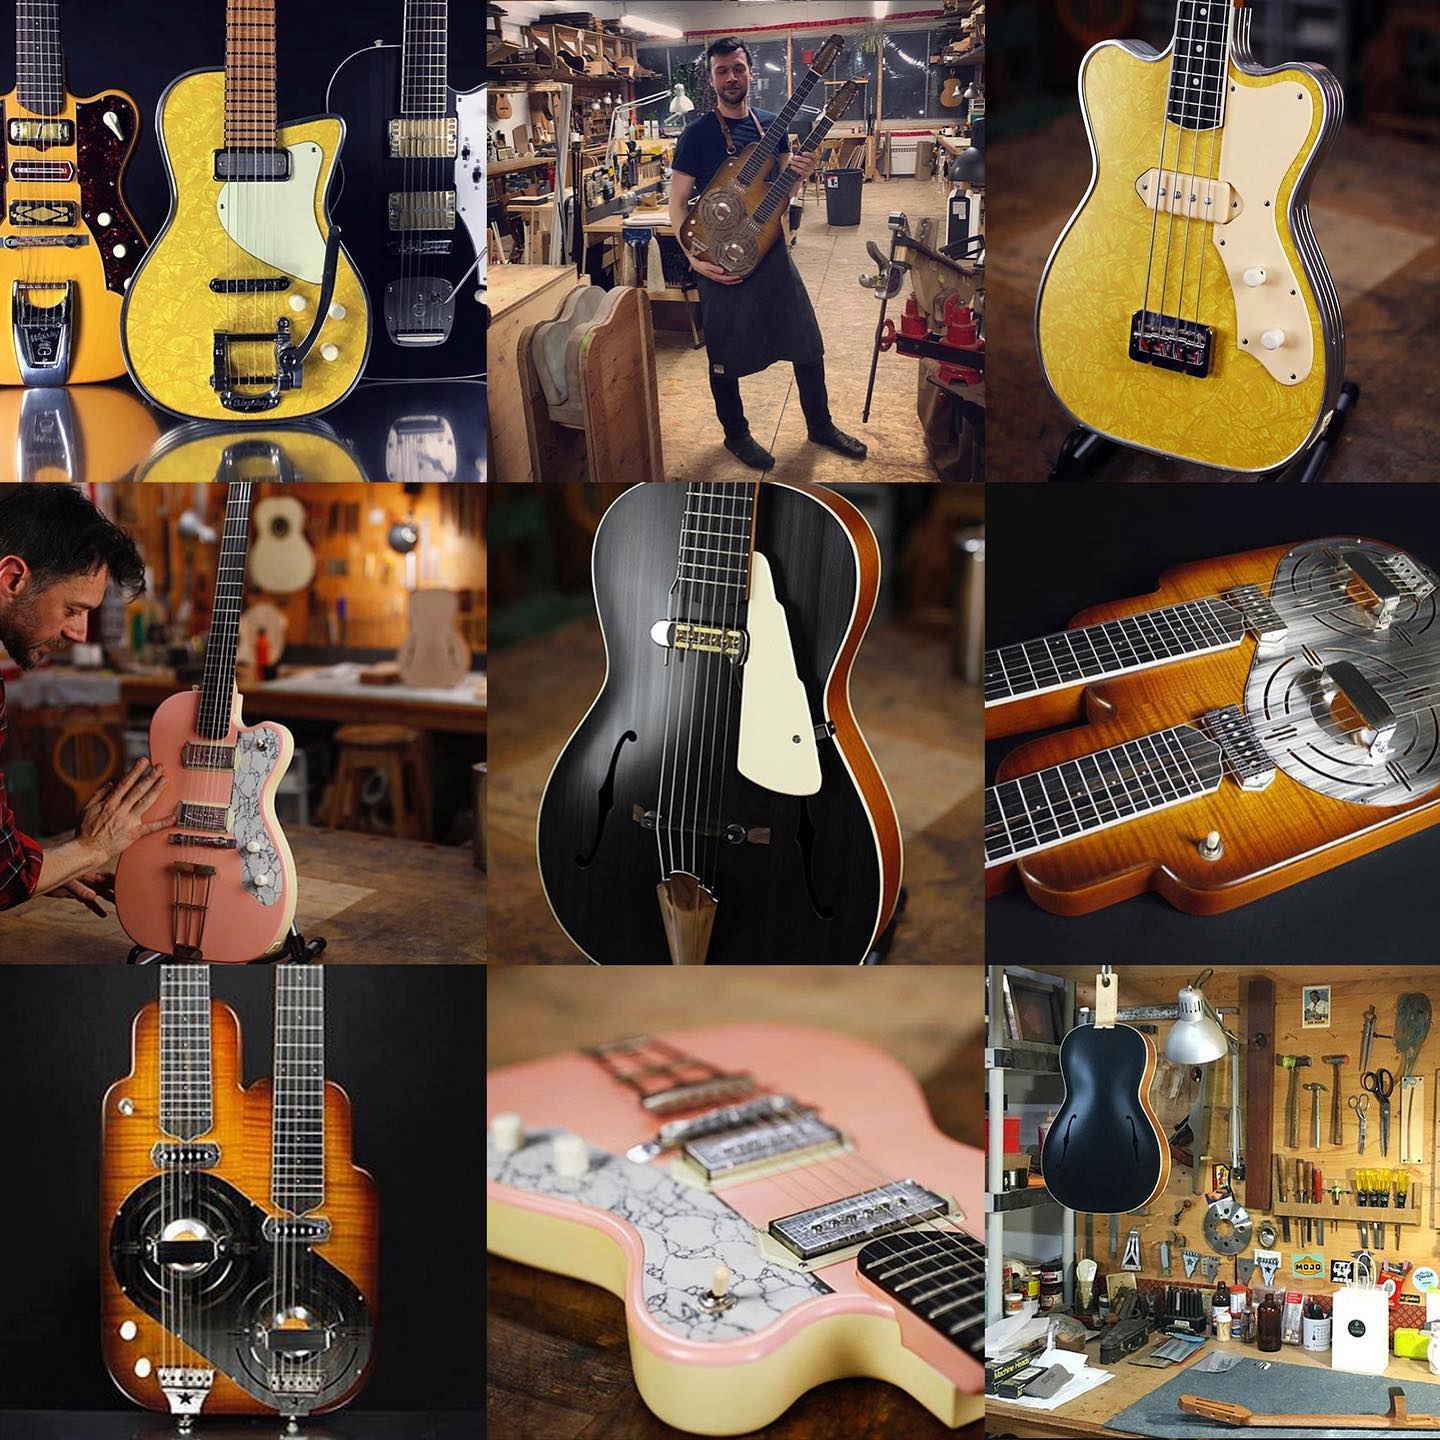 Daddy Mojo's instruments are diverse, but they all touch the nostalgic chord l Source: Daddy Mojo Facebook